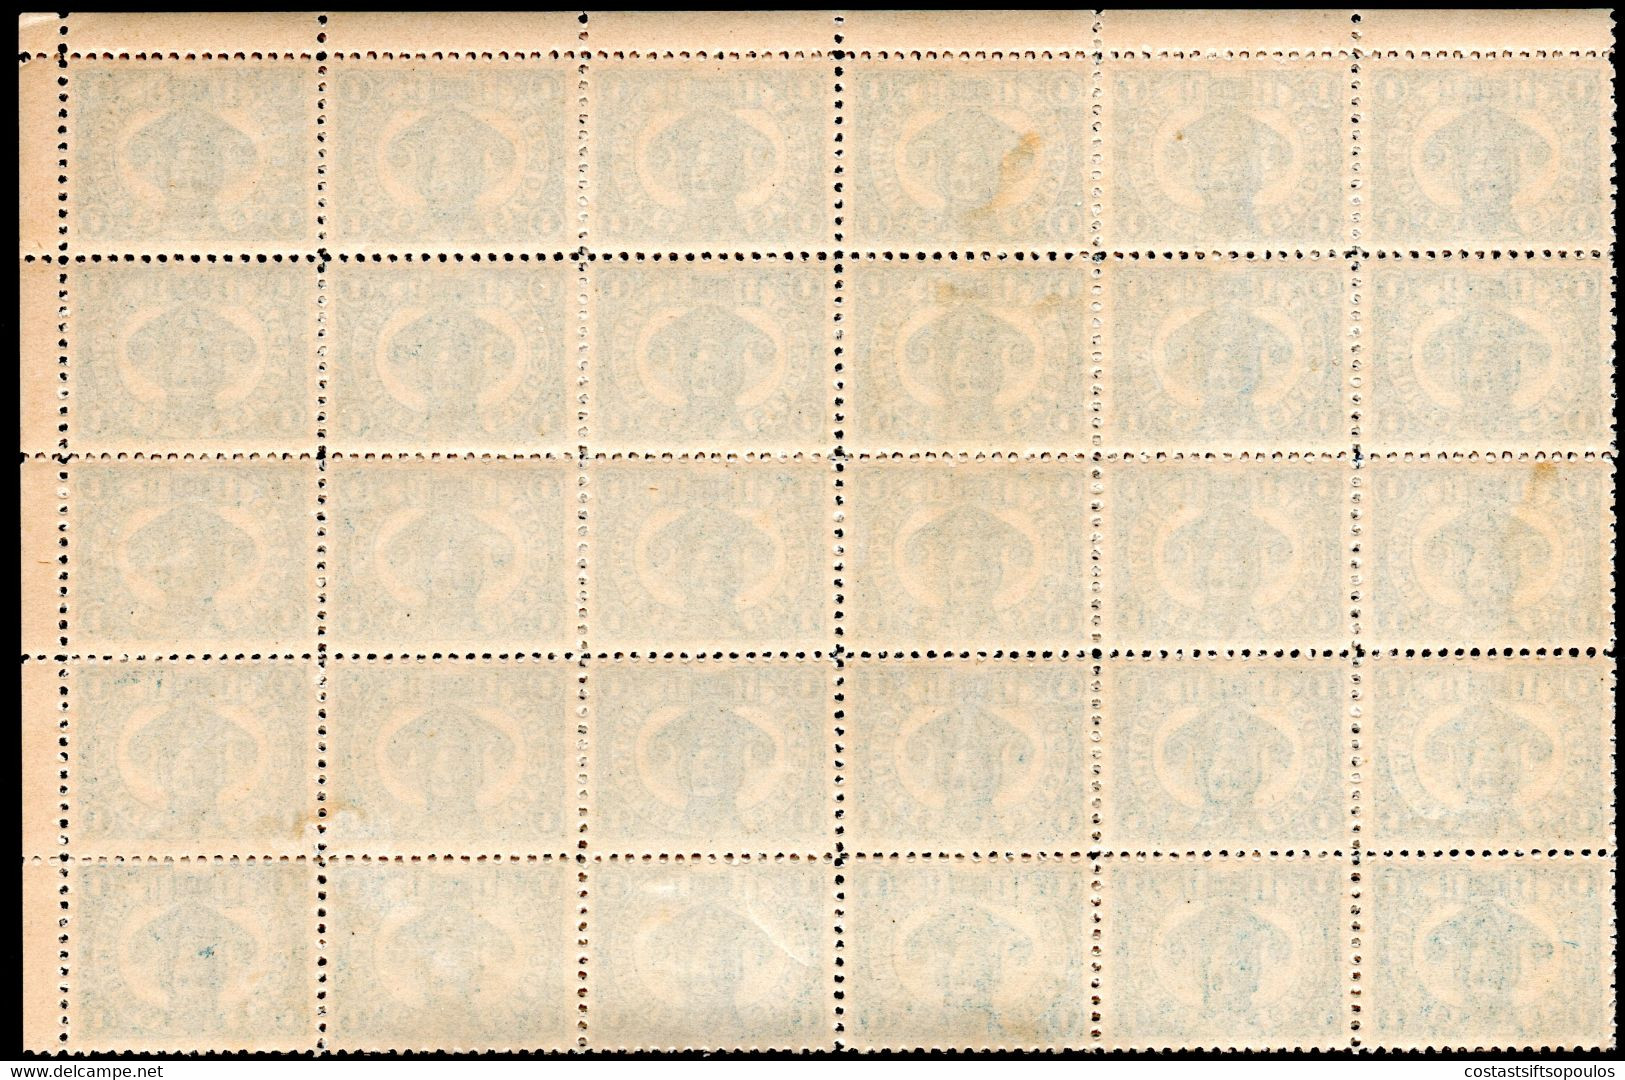 147.SWEDEN LOCAL,1887 STOCKHOLMS STADSPOST 1 ORE,MNH SHEET OF 60,FOLDED IN THE MIDDLE - Local Post Stamps